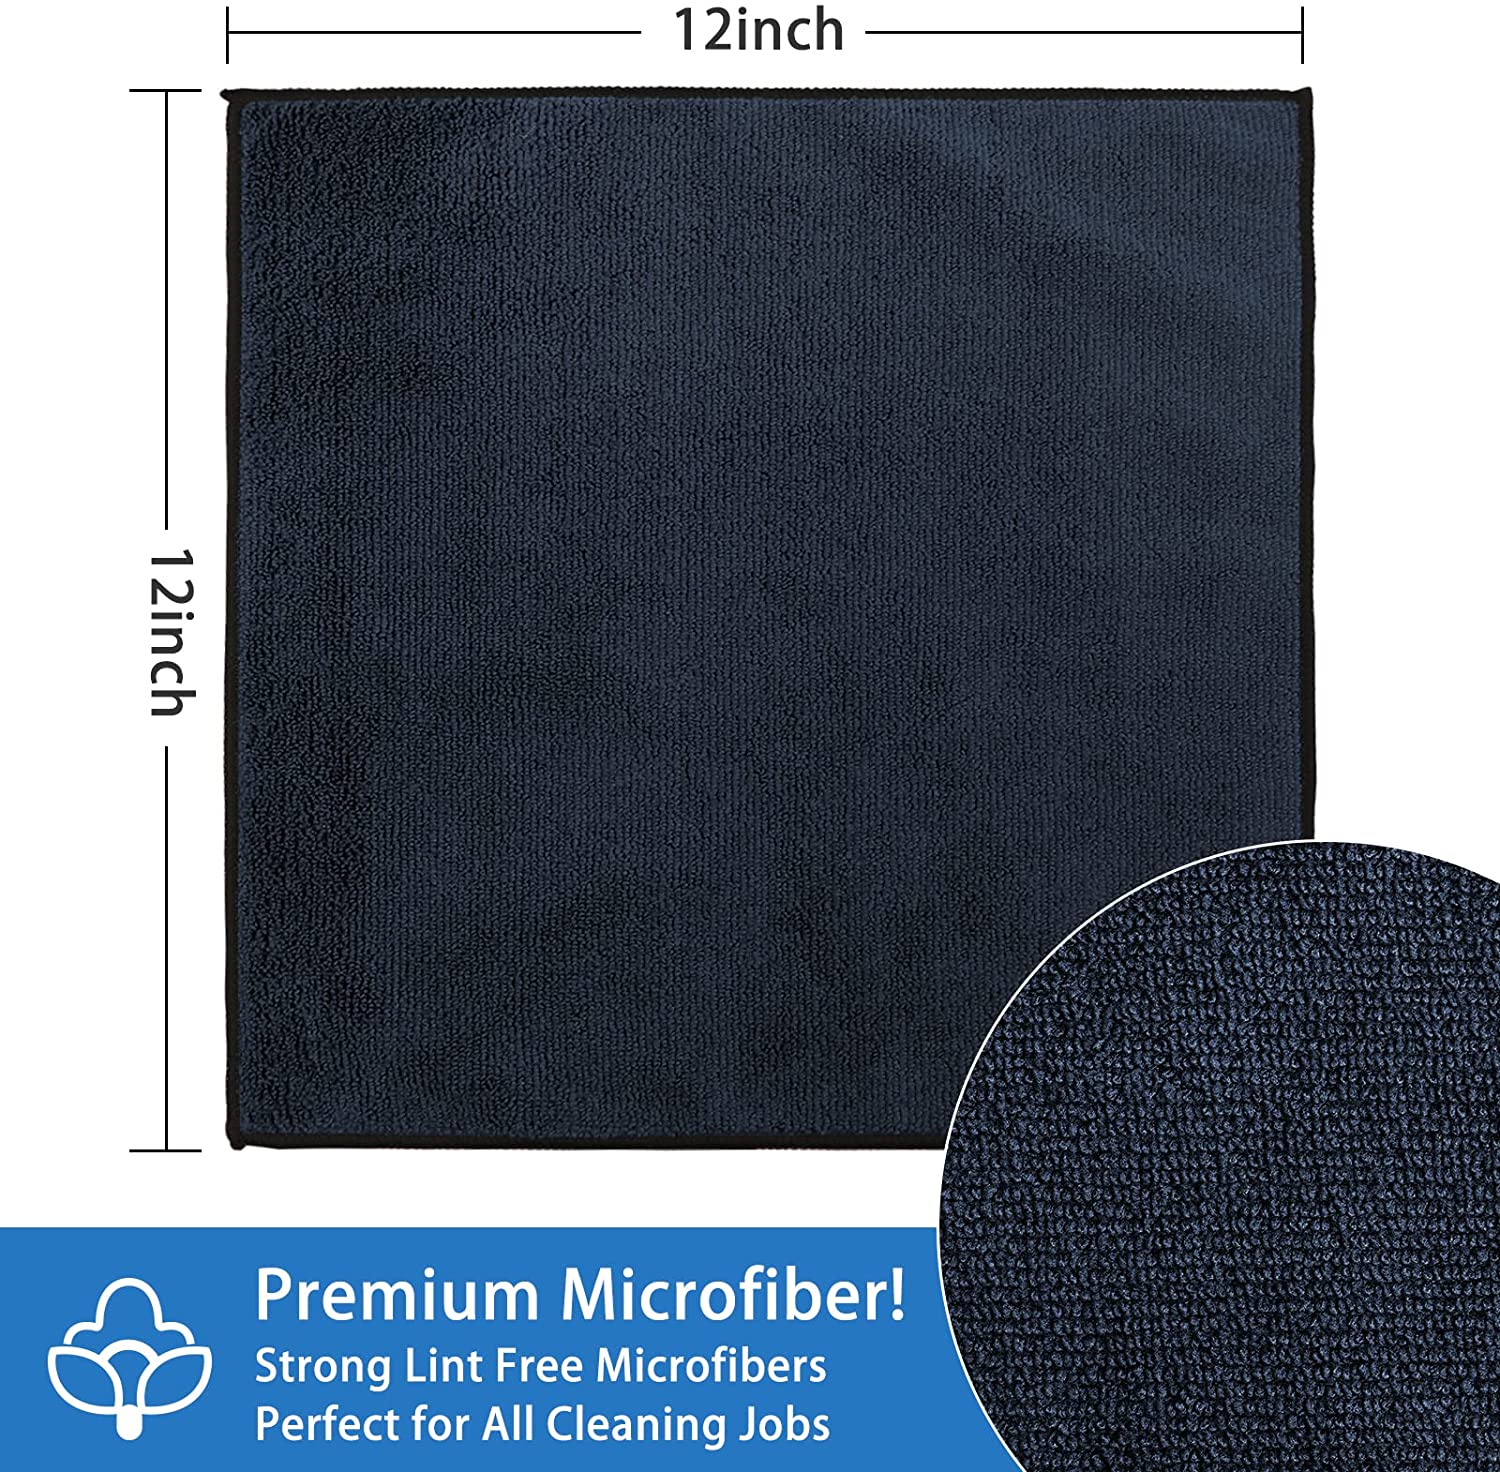  AIDEA Microfiber Cleaning Cloths-100PK, Soft Absorbent Rags for  Cleaning, Lint-Free Towels Cleaning, Microfiber Dusting Cloth for Home,  Kitchen, Car, Window (12in.x12in.) : Health & Household